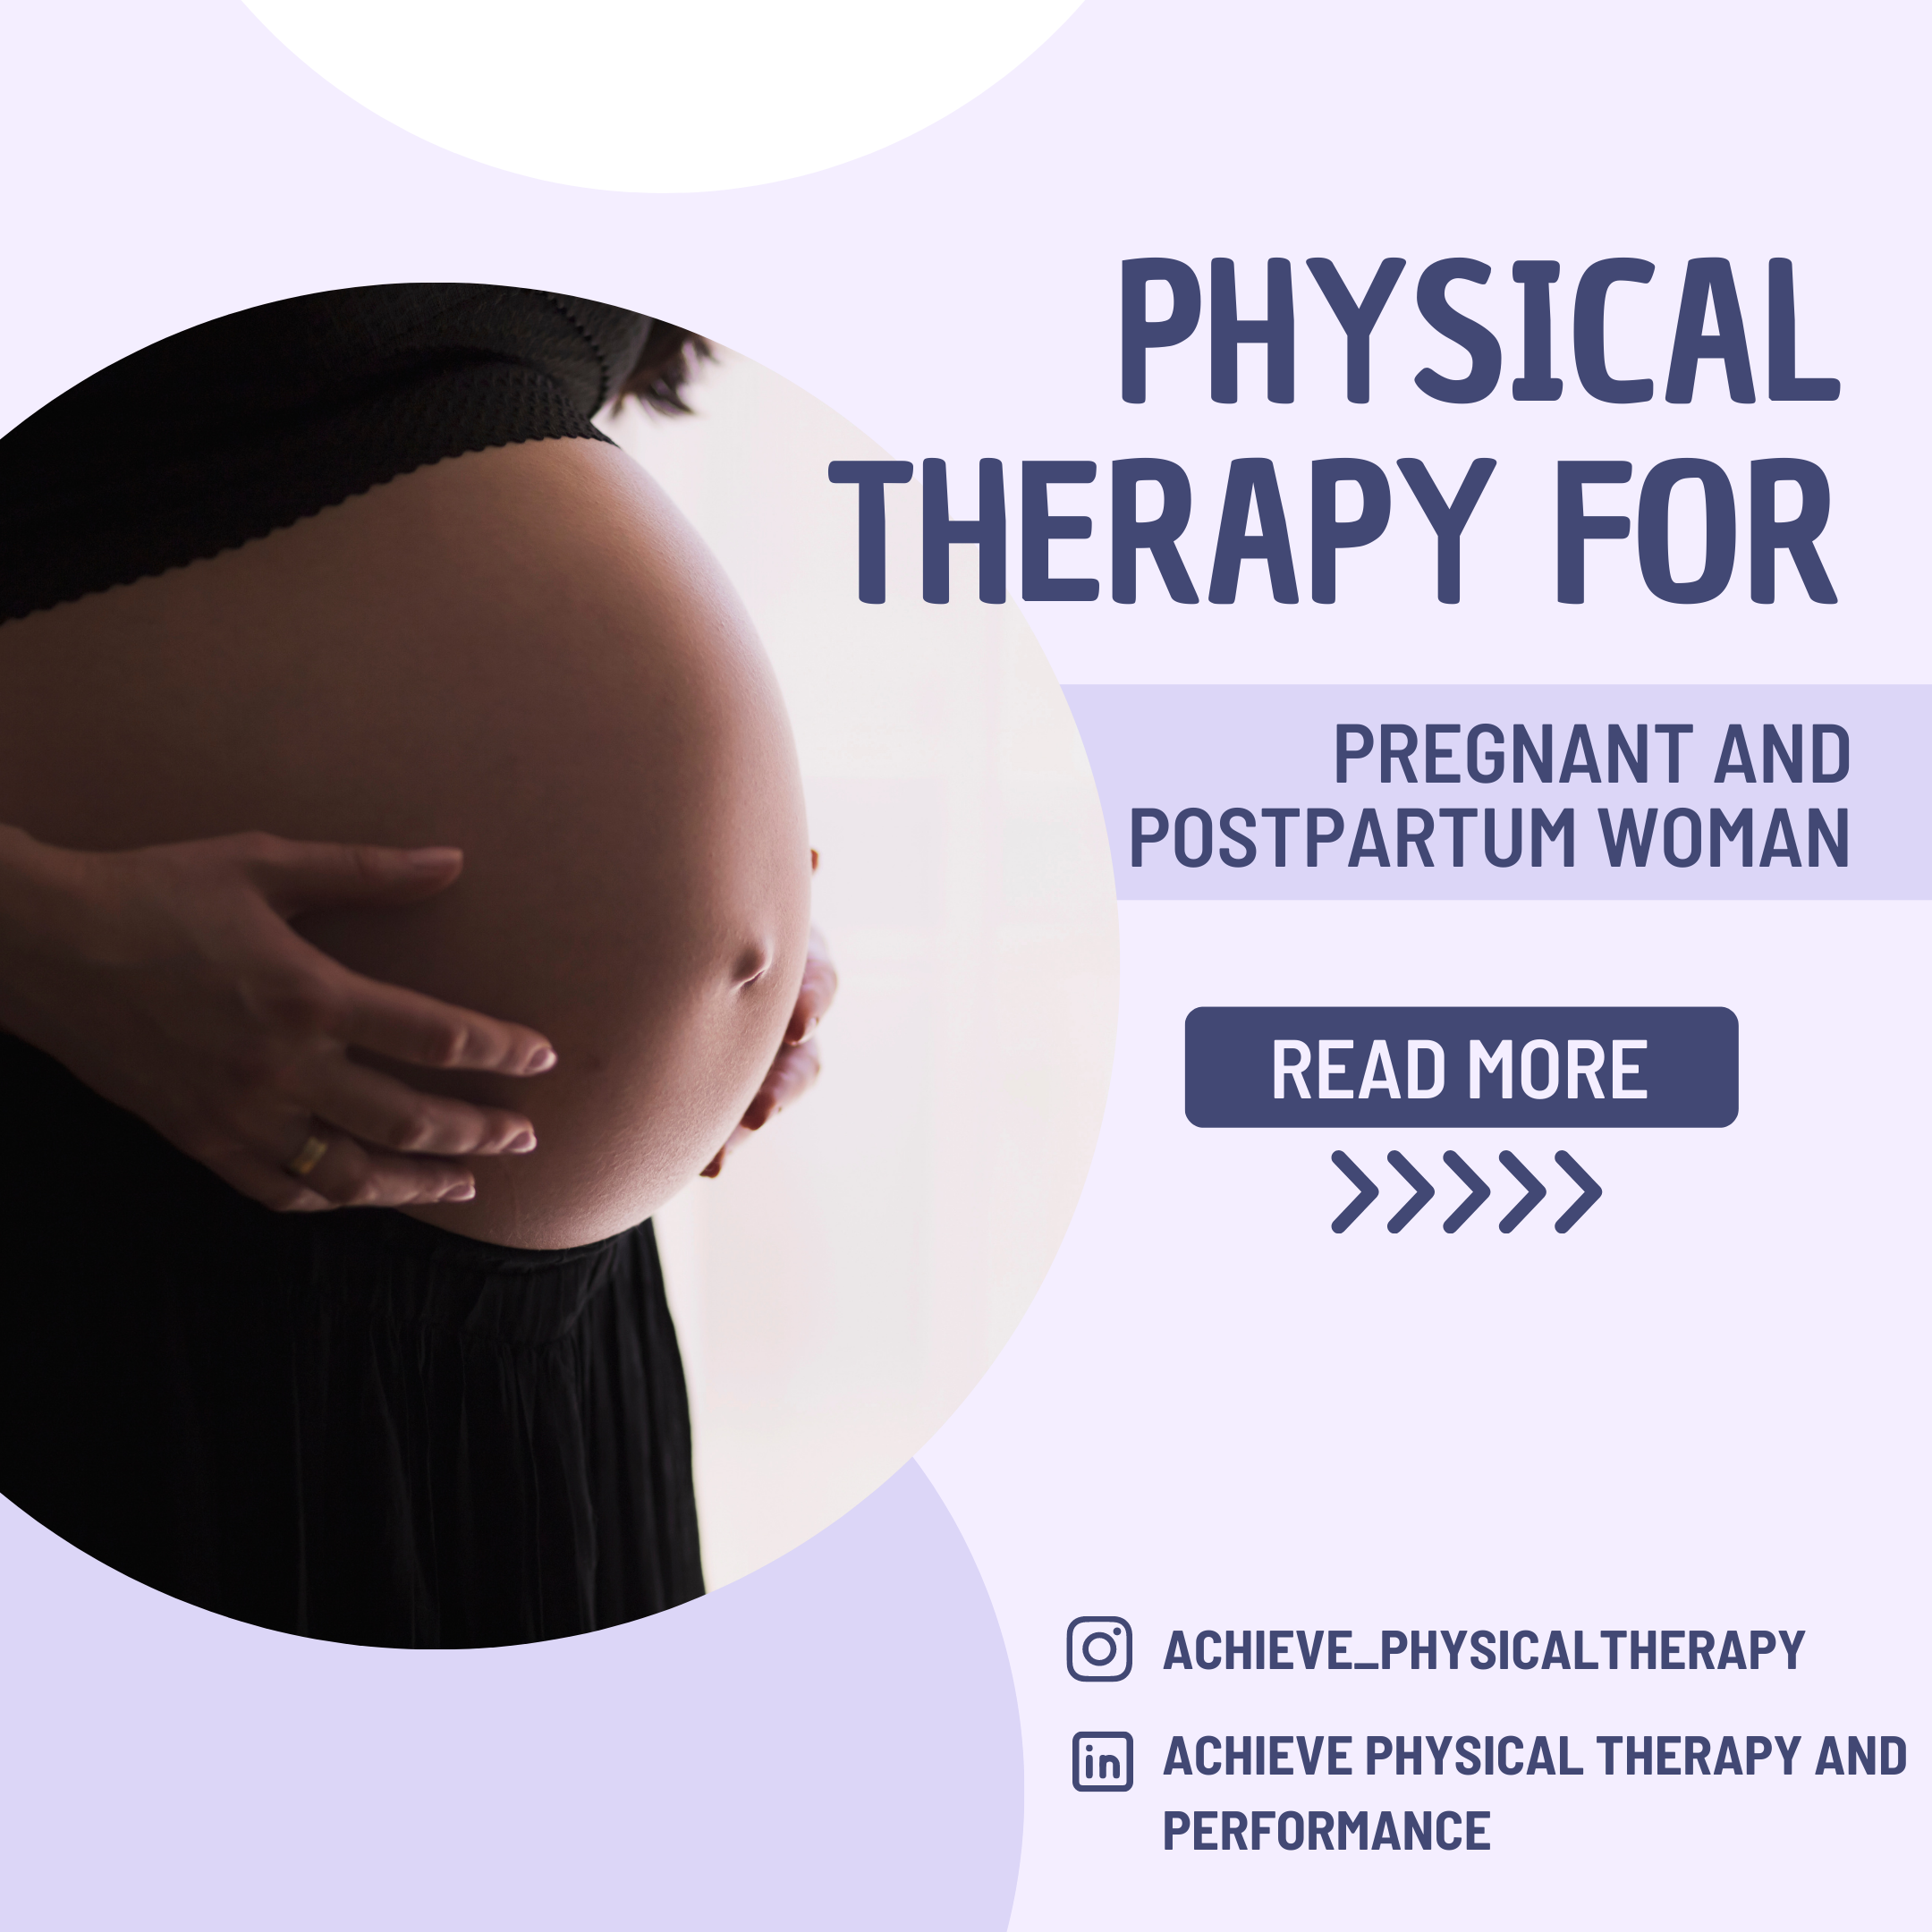 Physical therapy for pregnant women and postpartum, pregnancy and physical therapy, physical therapy for pregnancy